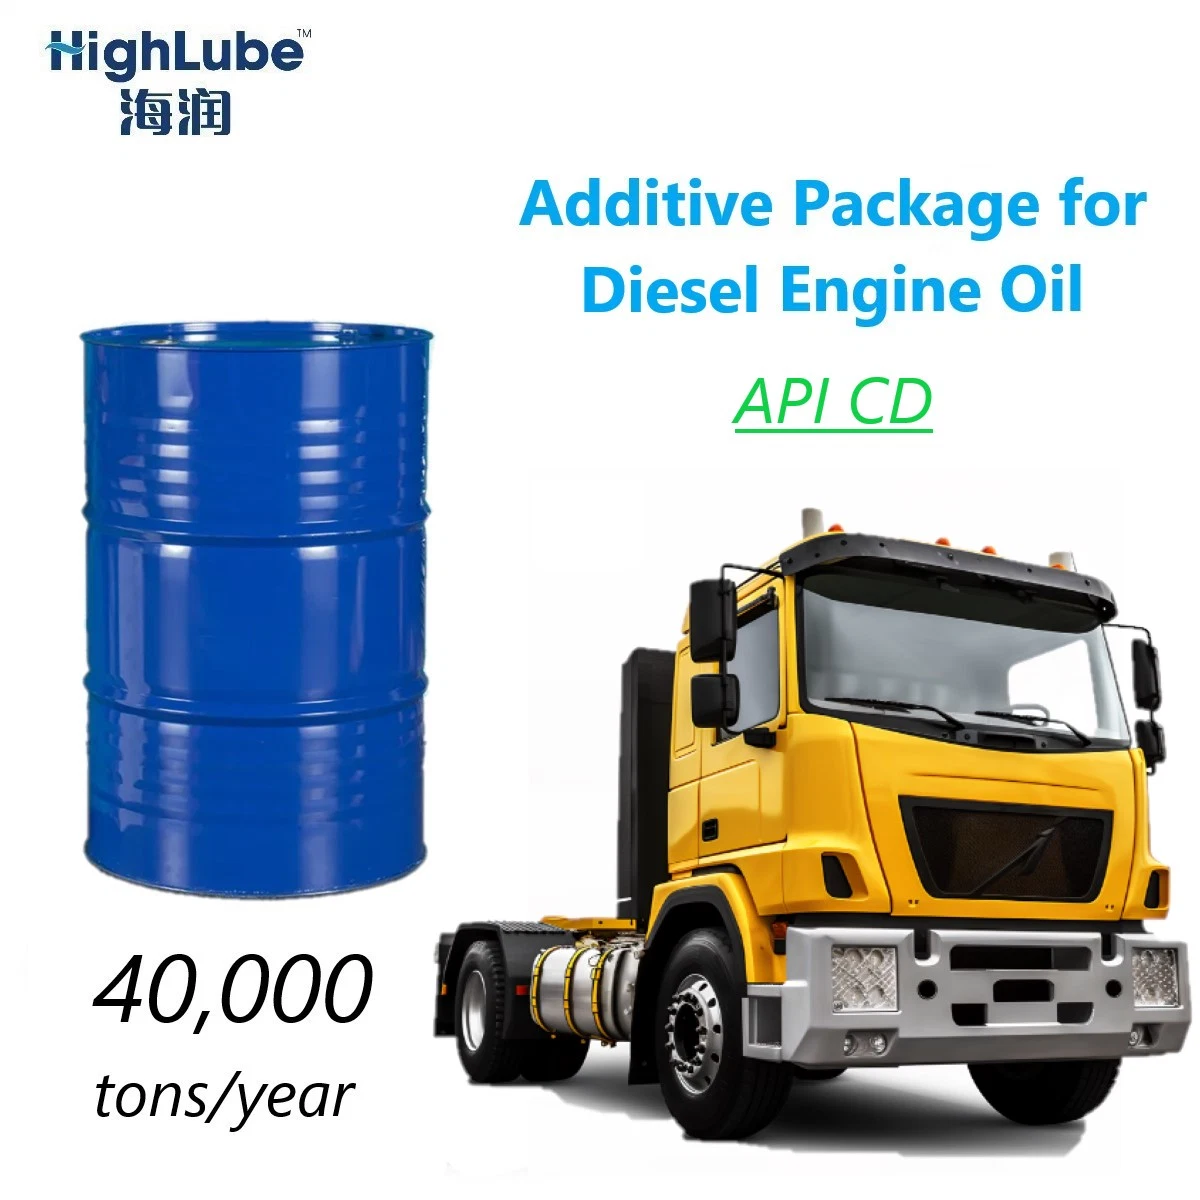 Combustion Engine Oil Package, Vehicle Oil Additive Package, API CD